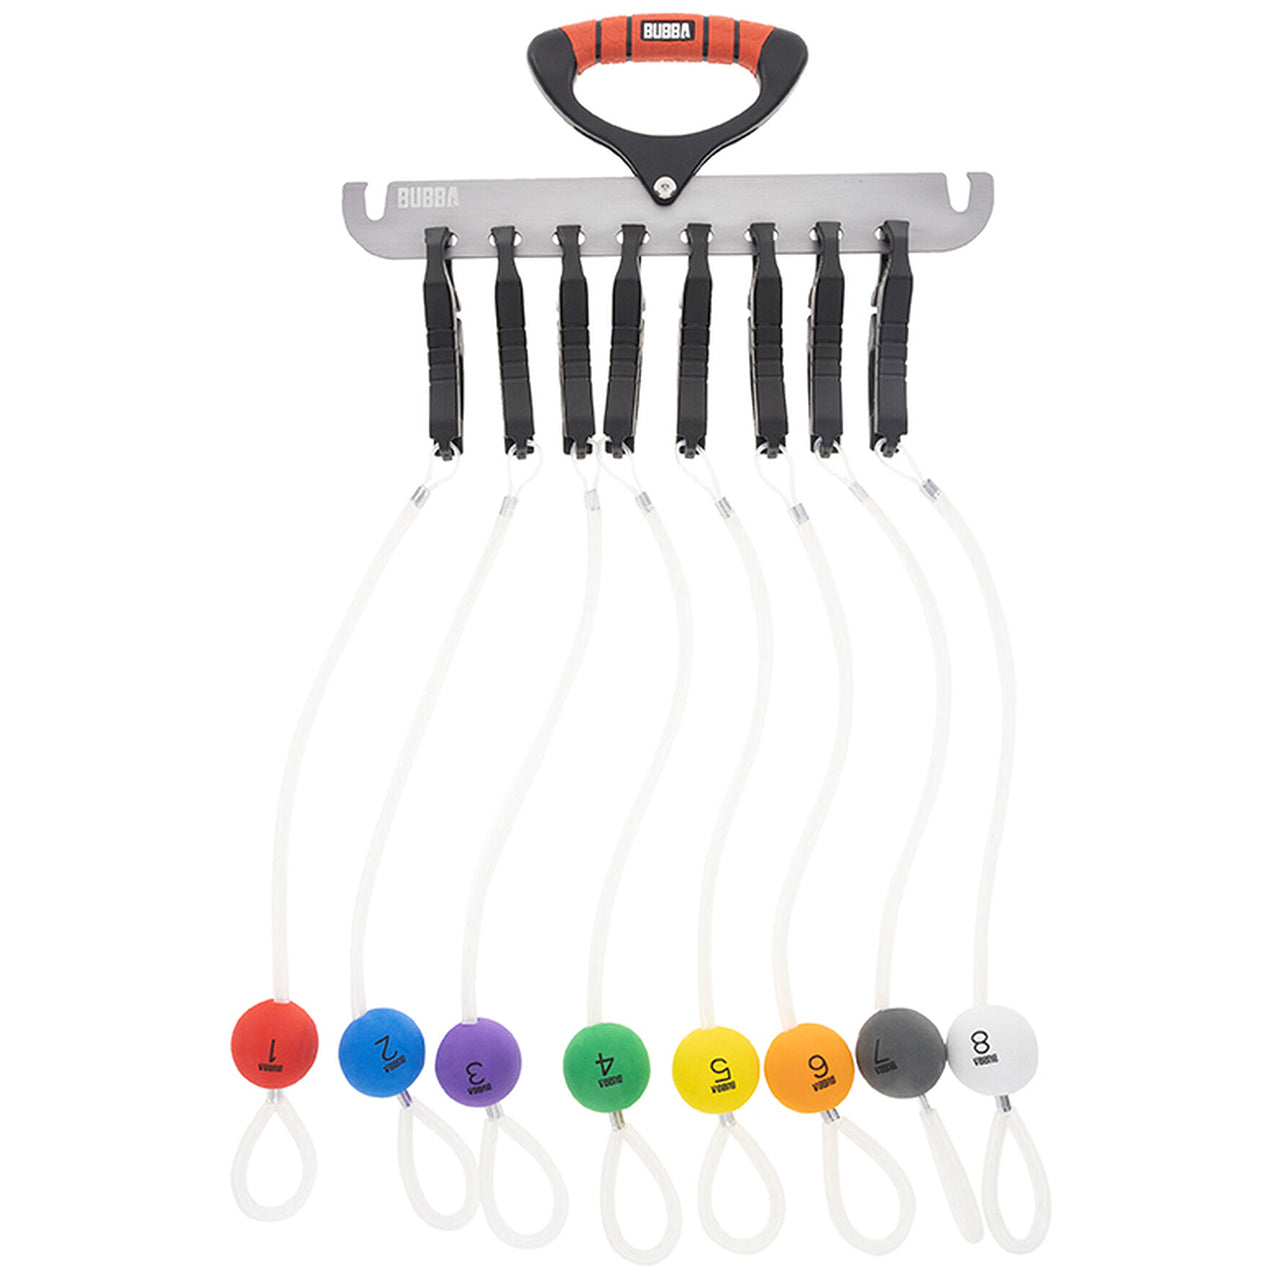 23 New Product Review - Bubba Pro Series Smart Fish Scale 